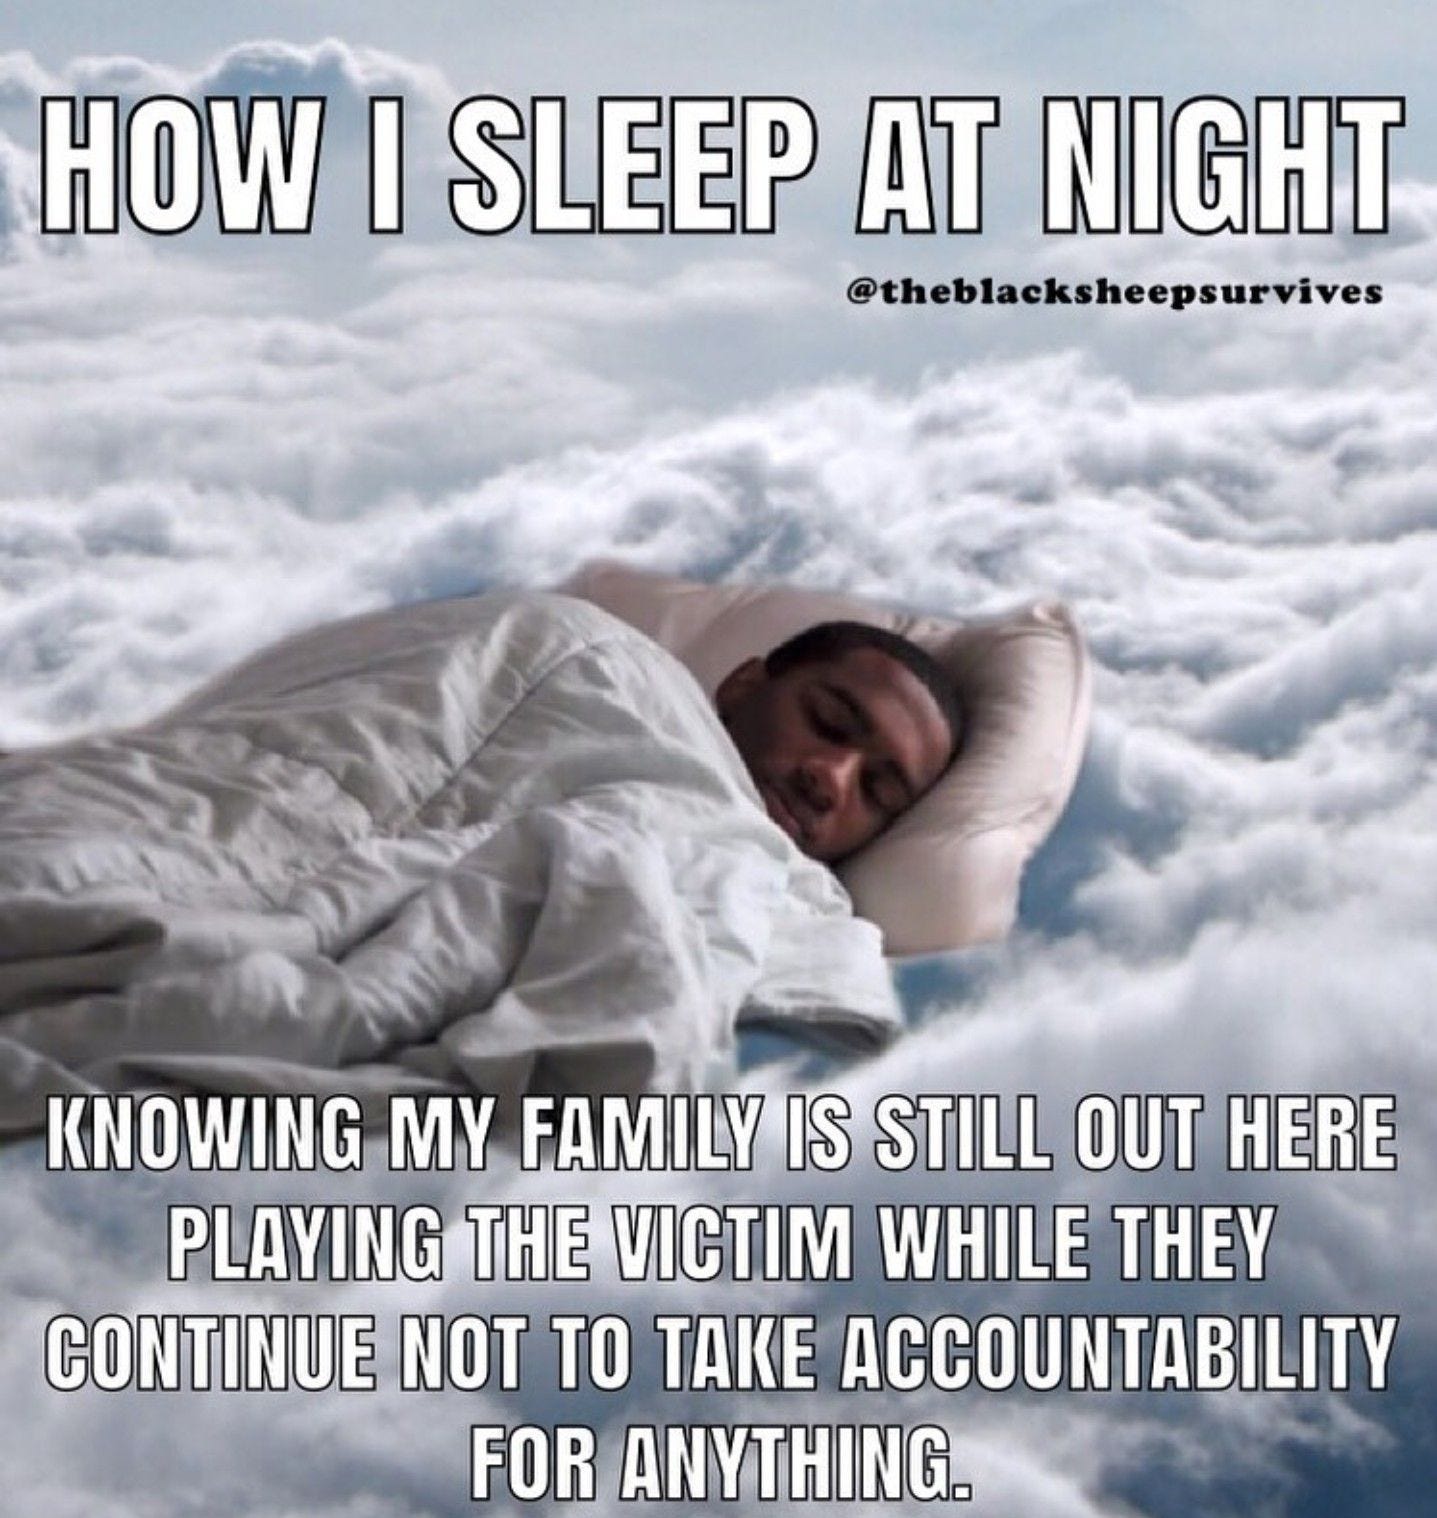 Person sleeping soundly amongst the clouds, with caption "How I sleep at night... knowing my family is still out here playing the victim while they continue to not take accountability for anything."